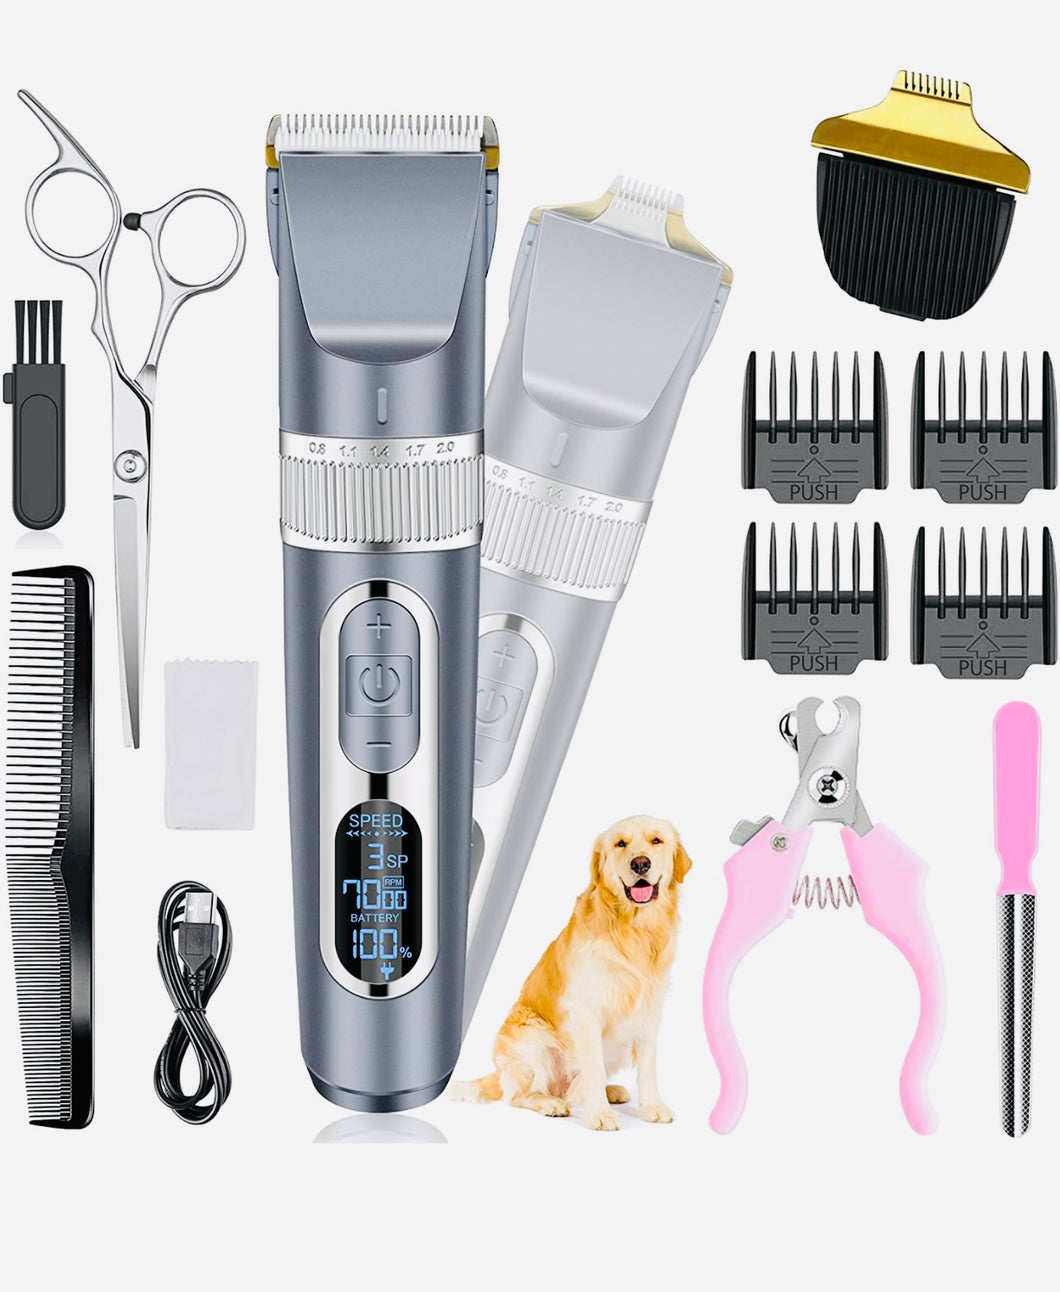 Dog cordless pet clippers 2 in 1 with small trimmer blade,Eocean 13 pieces pet dog grooming kits with detachable blades etc